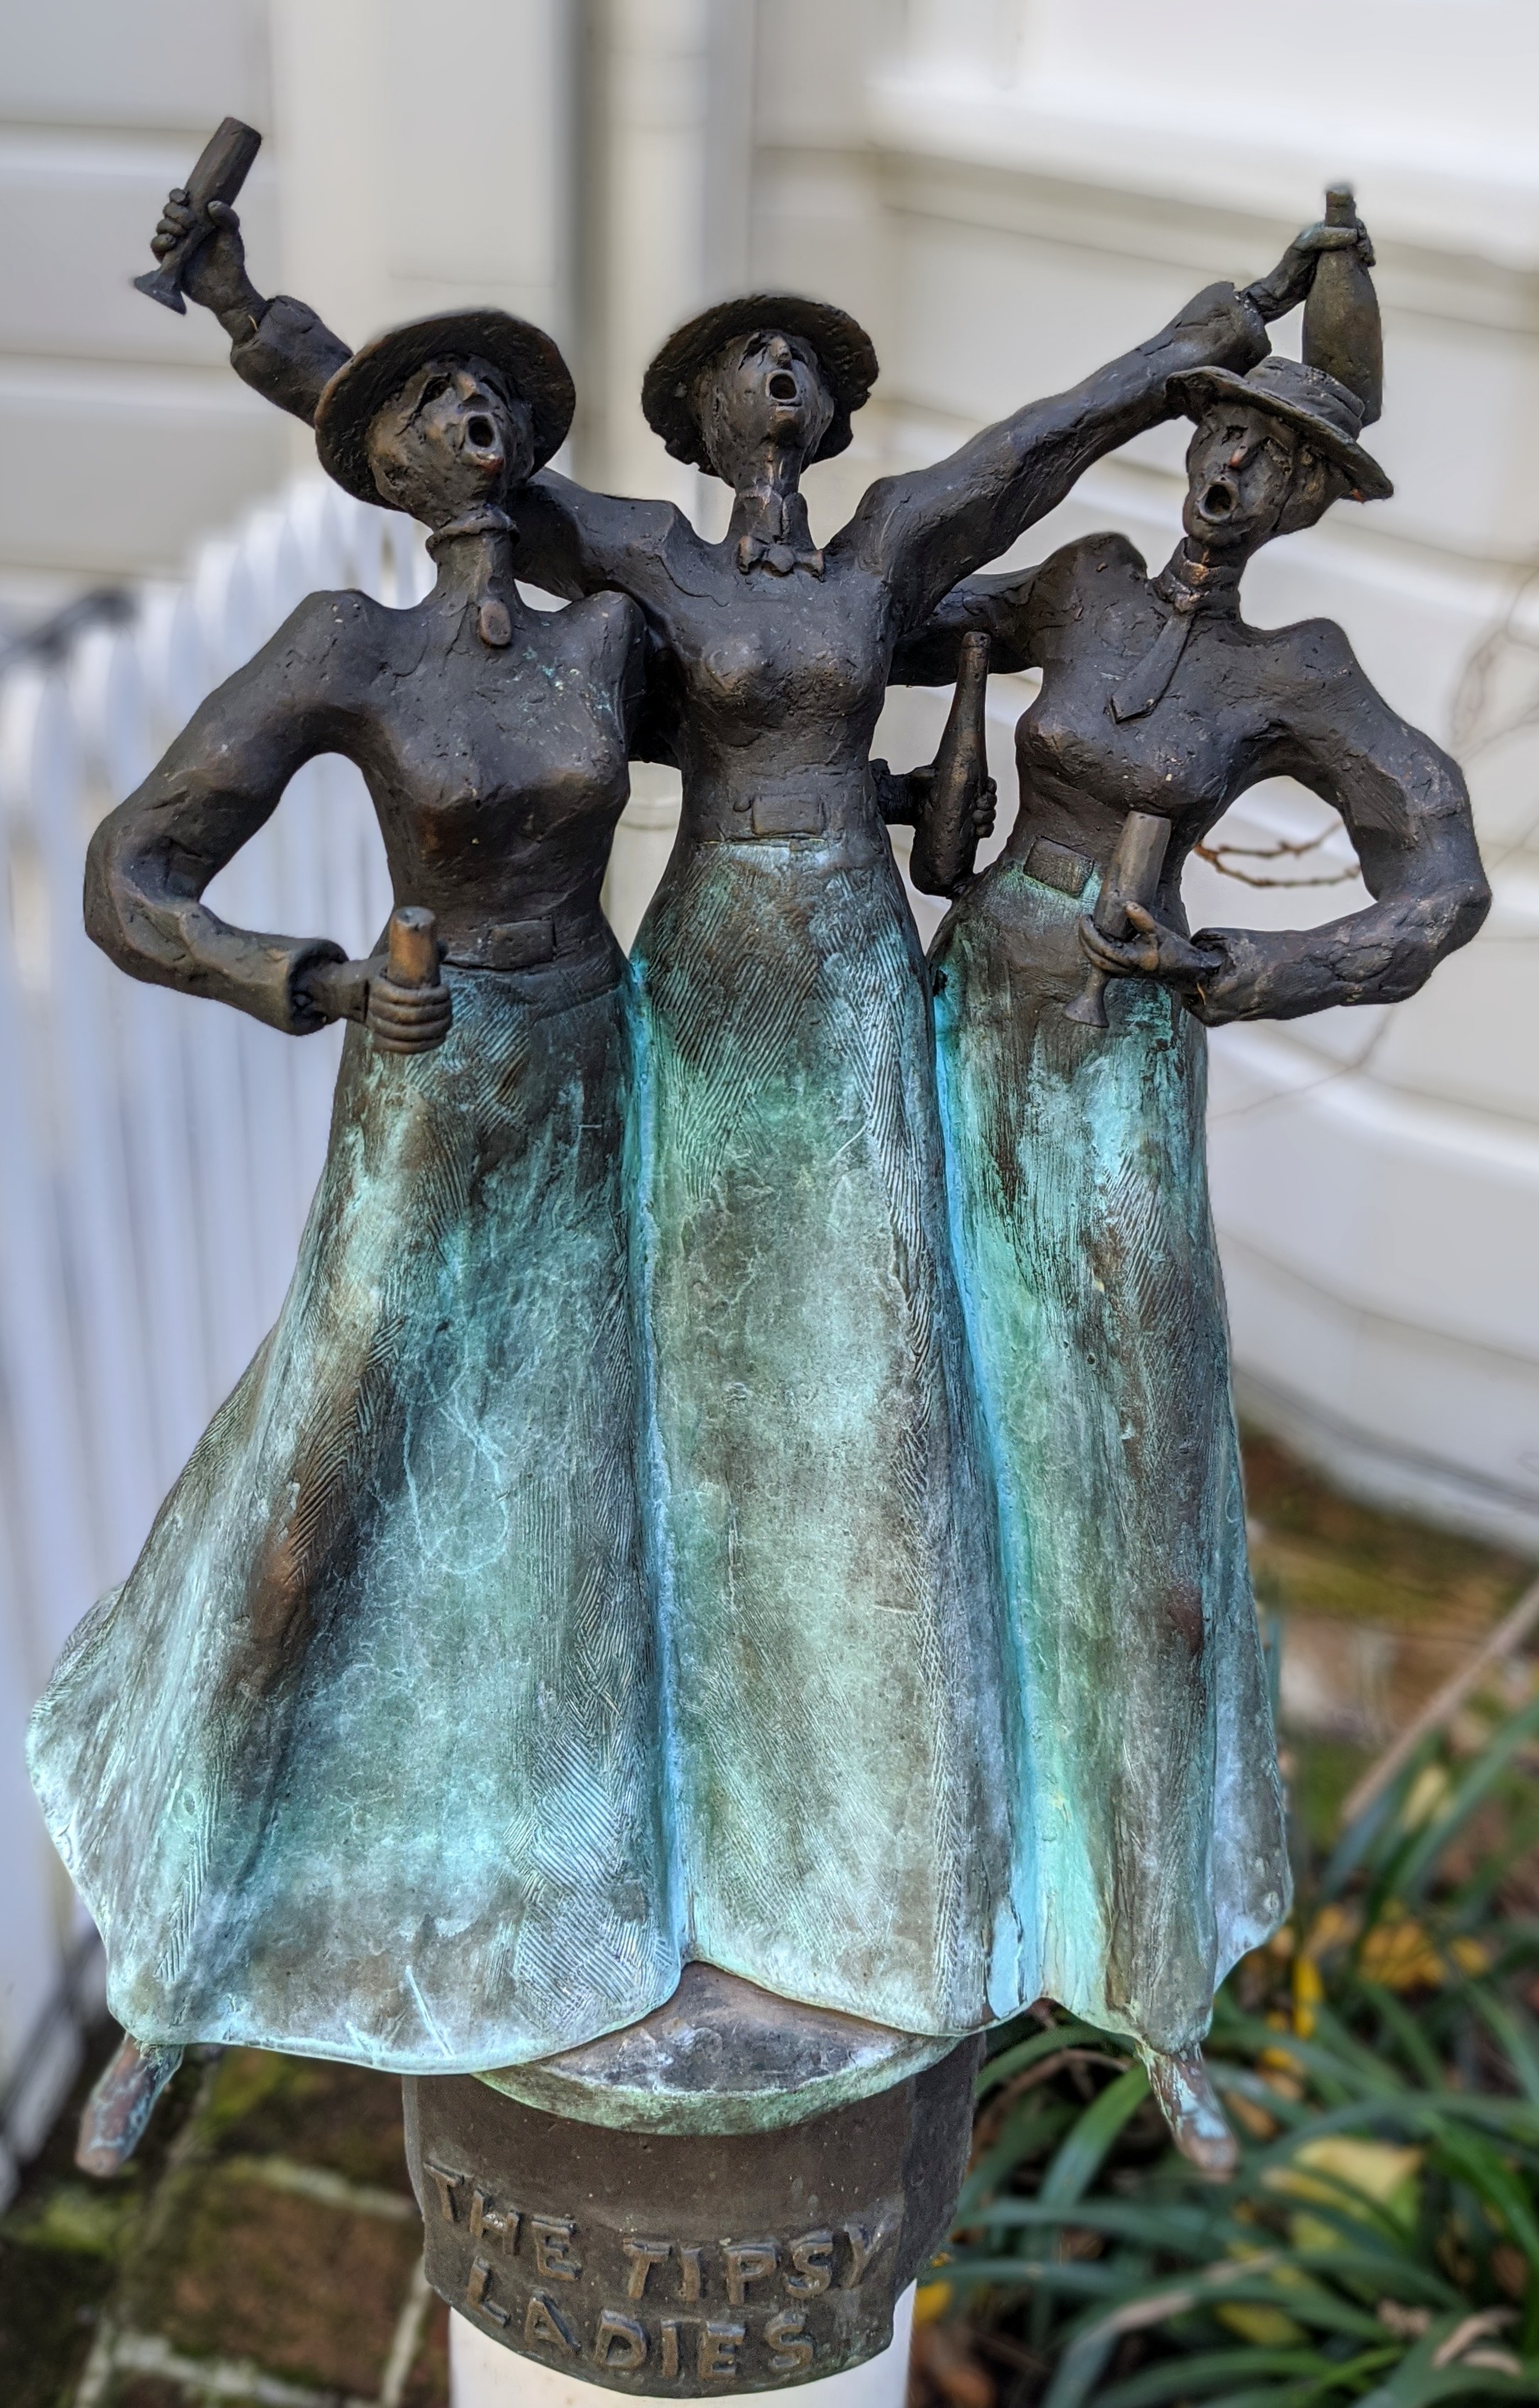 'Tipsy Ladies' statue of 3 revelling Edwardian ladies with bottles in their hands